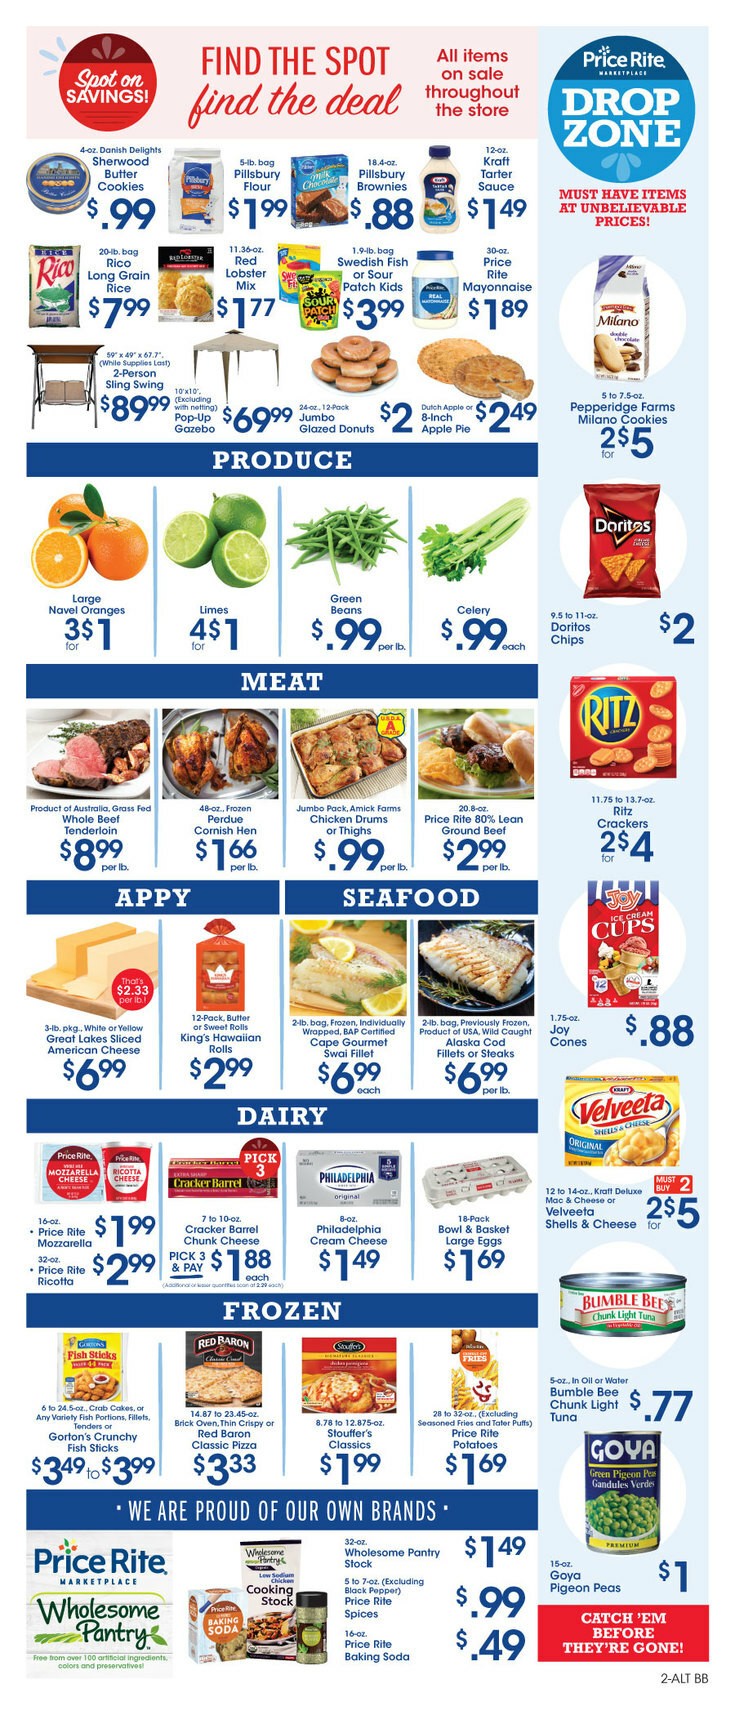 Price Rite Weekly Ad from March 27